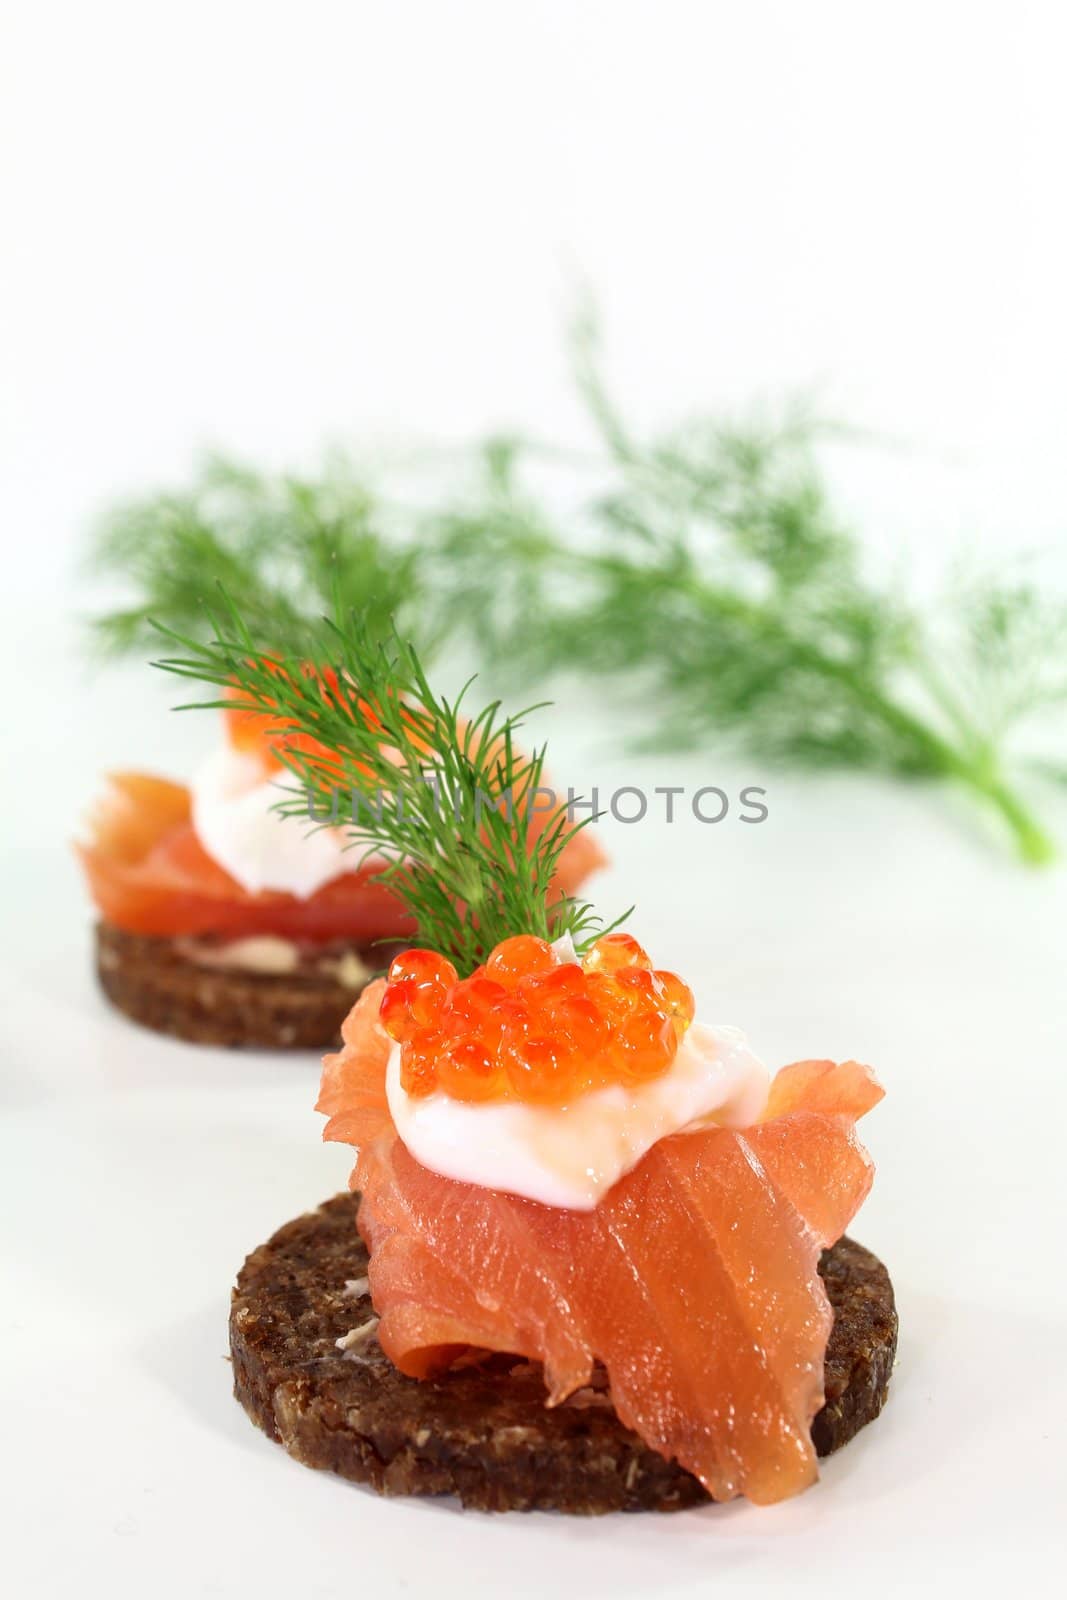 Canapes with smoked salmon, caviar and dill